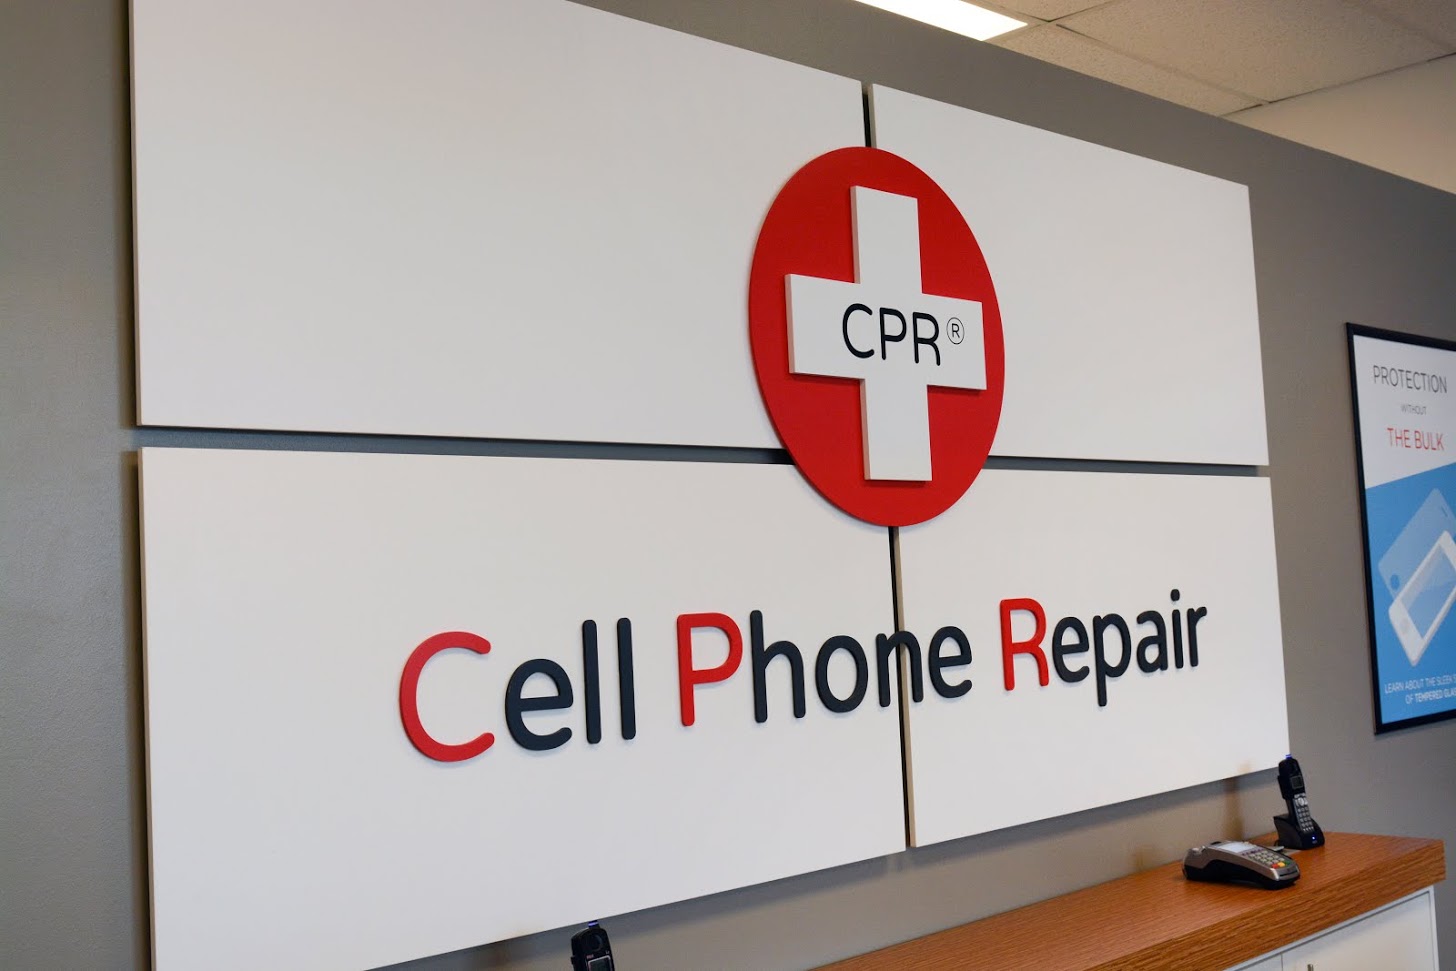 CPR Cell Phone Repair, Thursday, October 17, 2019, Press release picture